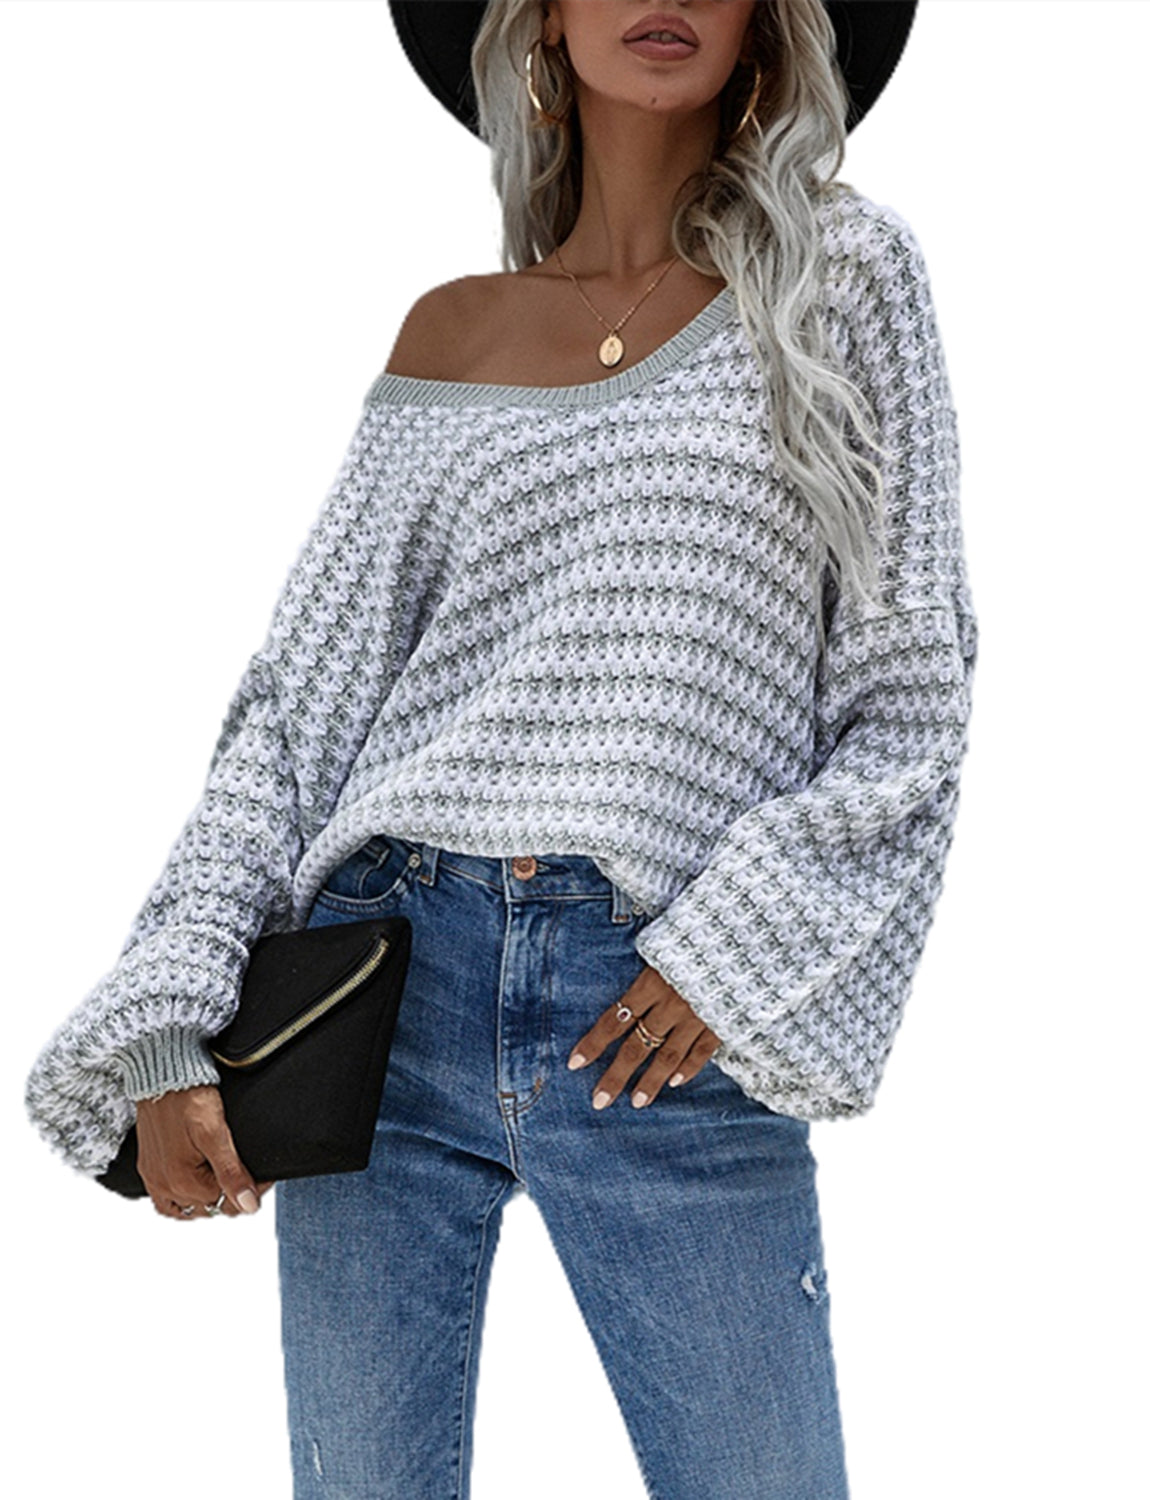 Women's Dropped Shoulder Loose Casual Long Sleeve Pullover Sweater Cozy Top